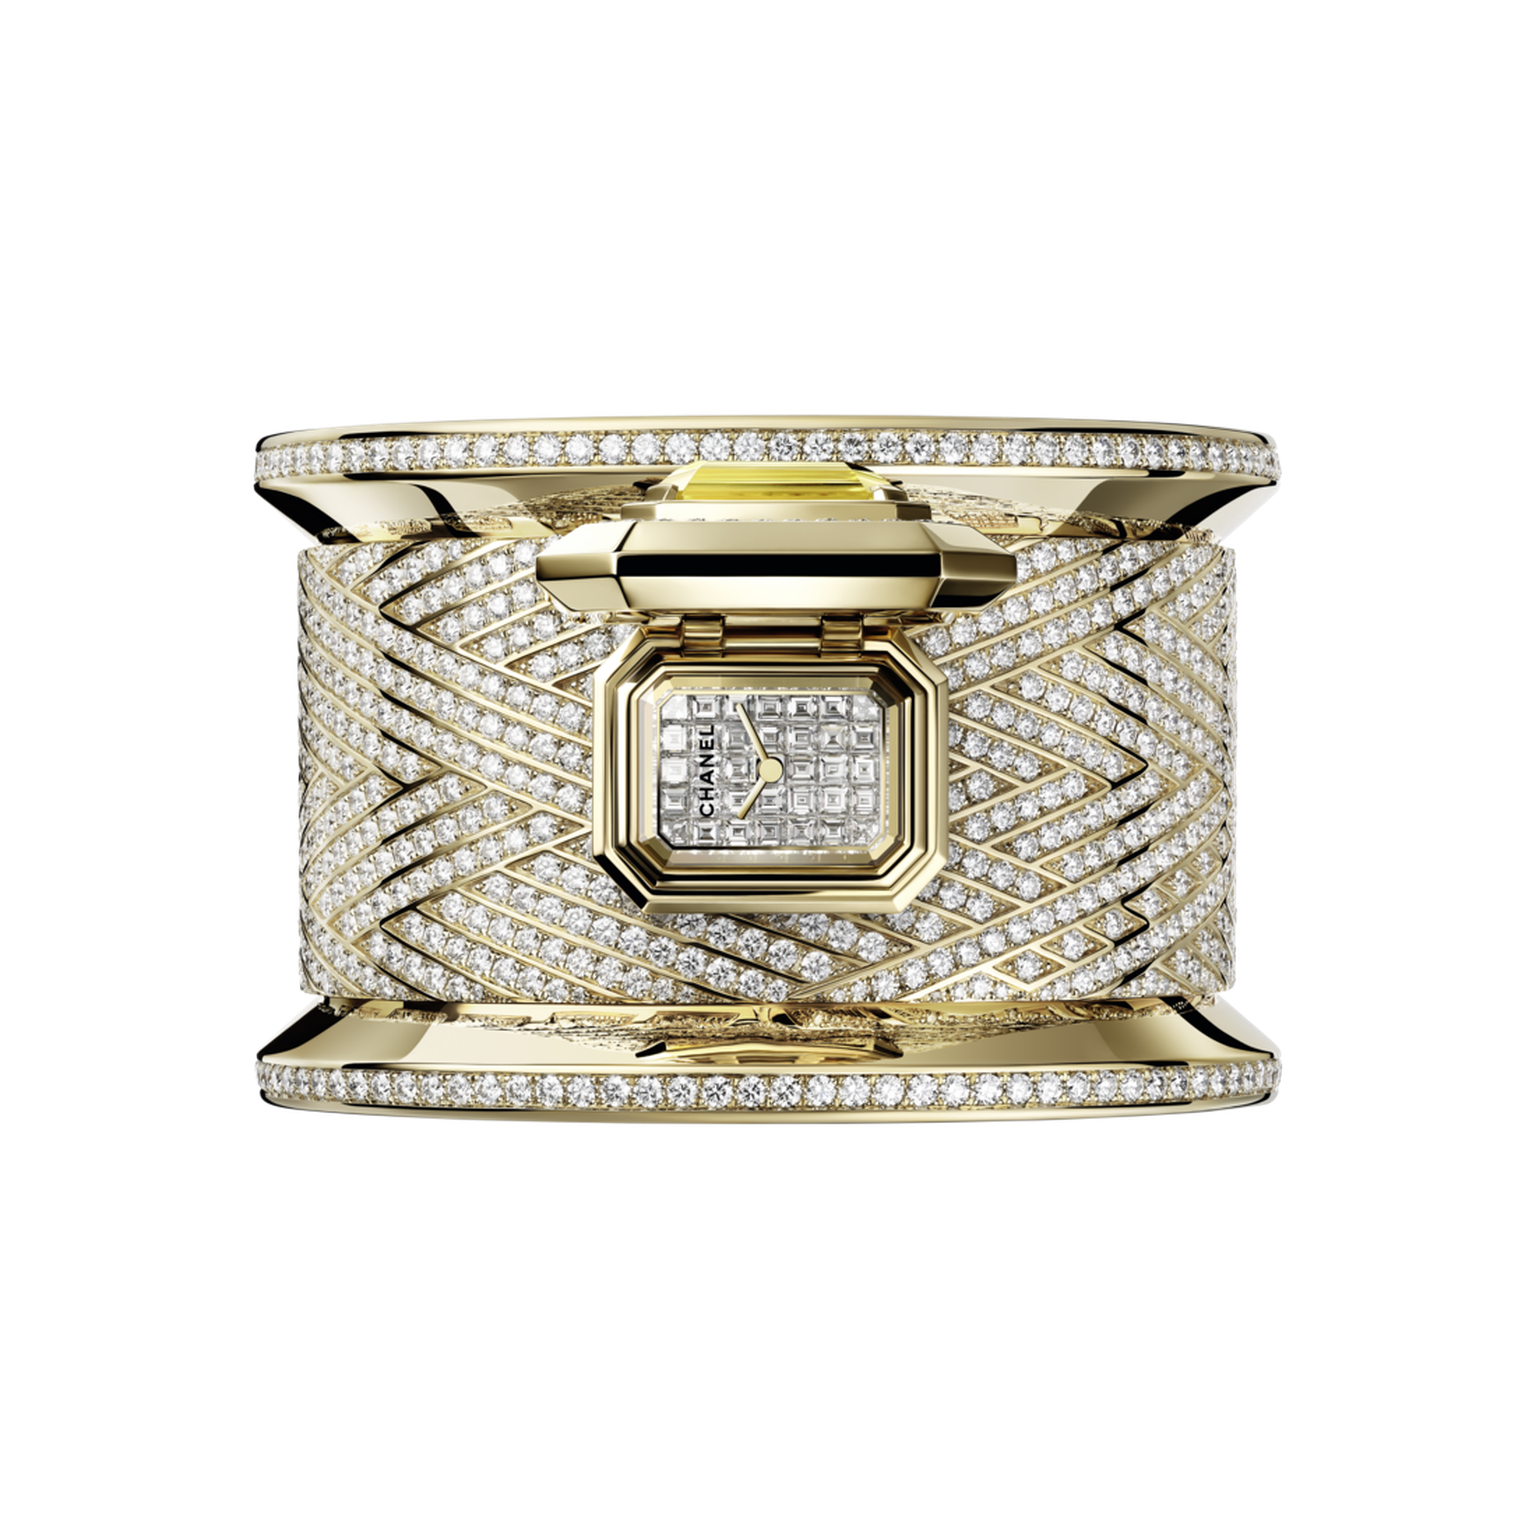 Bobbin Cuff Couture watch by Chanel